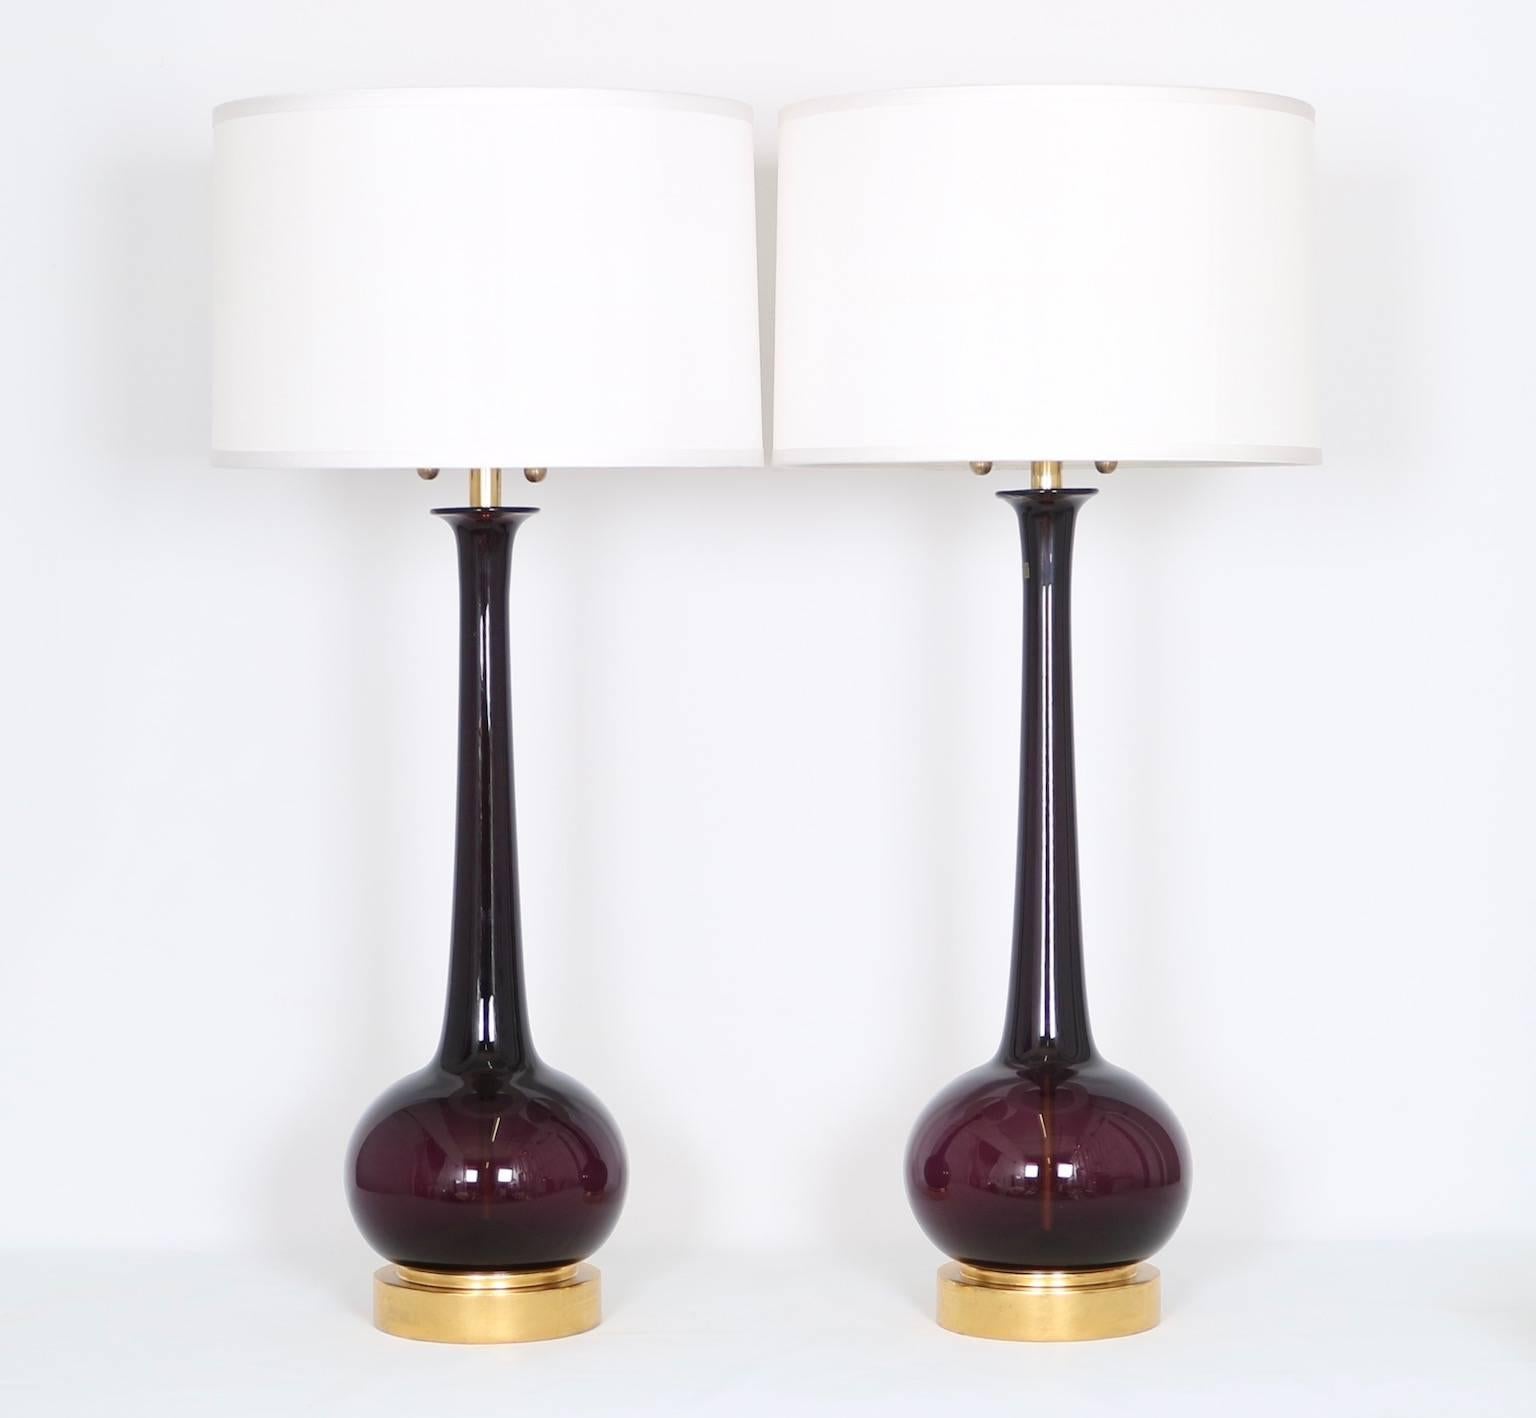 Pair of Mid-Century Modern Murano long-neck glass lamps by Seguso in a deep amethyst color for Marbro. Mounted on gilded wooden bases. Includes the original sticker ” Venetian Glass.” The noted height is to the finial, the height to the top of the